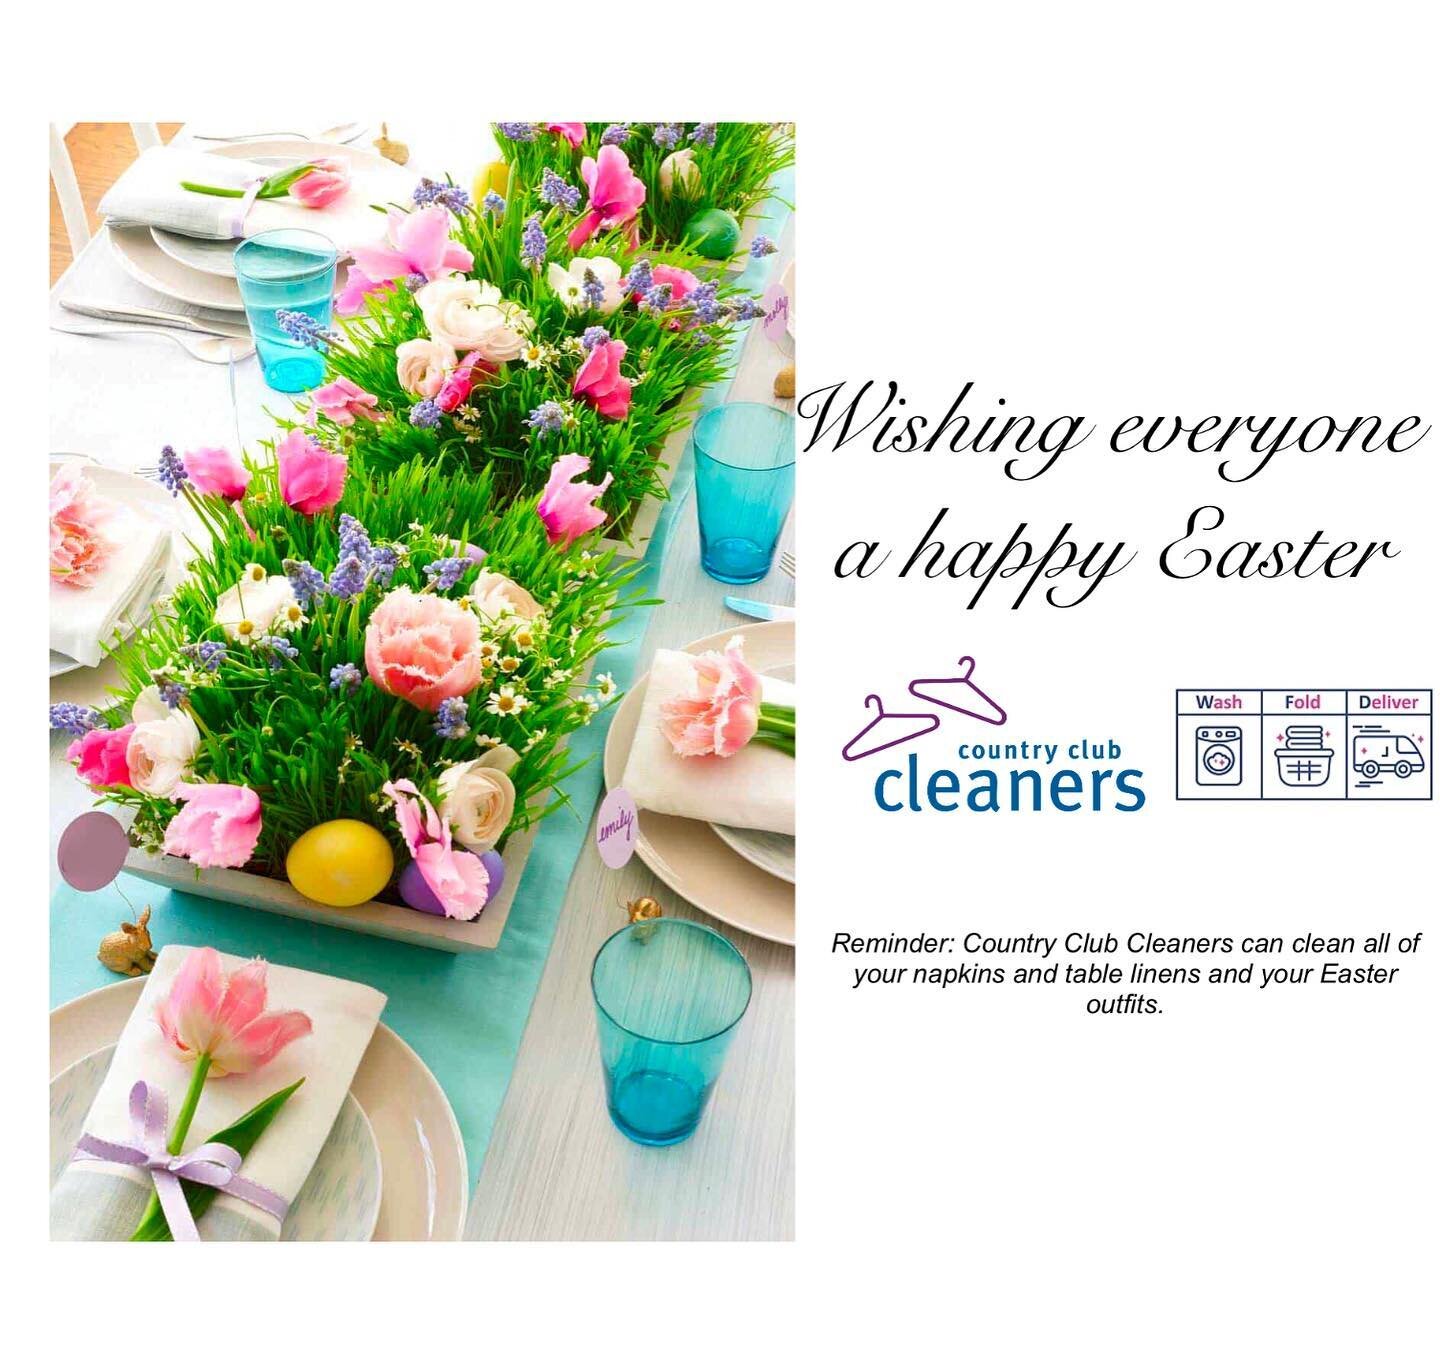 Wishing everyone a happy Easter! 
Just a reminder, Country Club Cleaners will clean all of your table linens and Easter best and get them looking brand new! We are back open tomorrow and drivers will be out picking up and delivering.